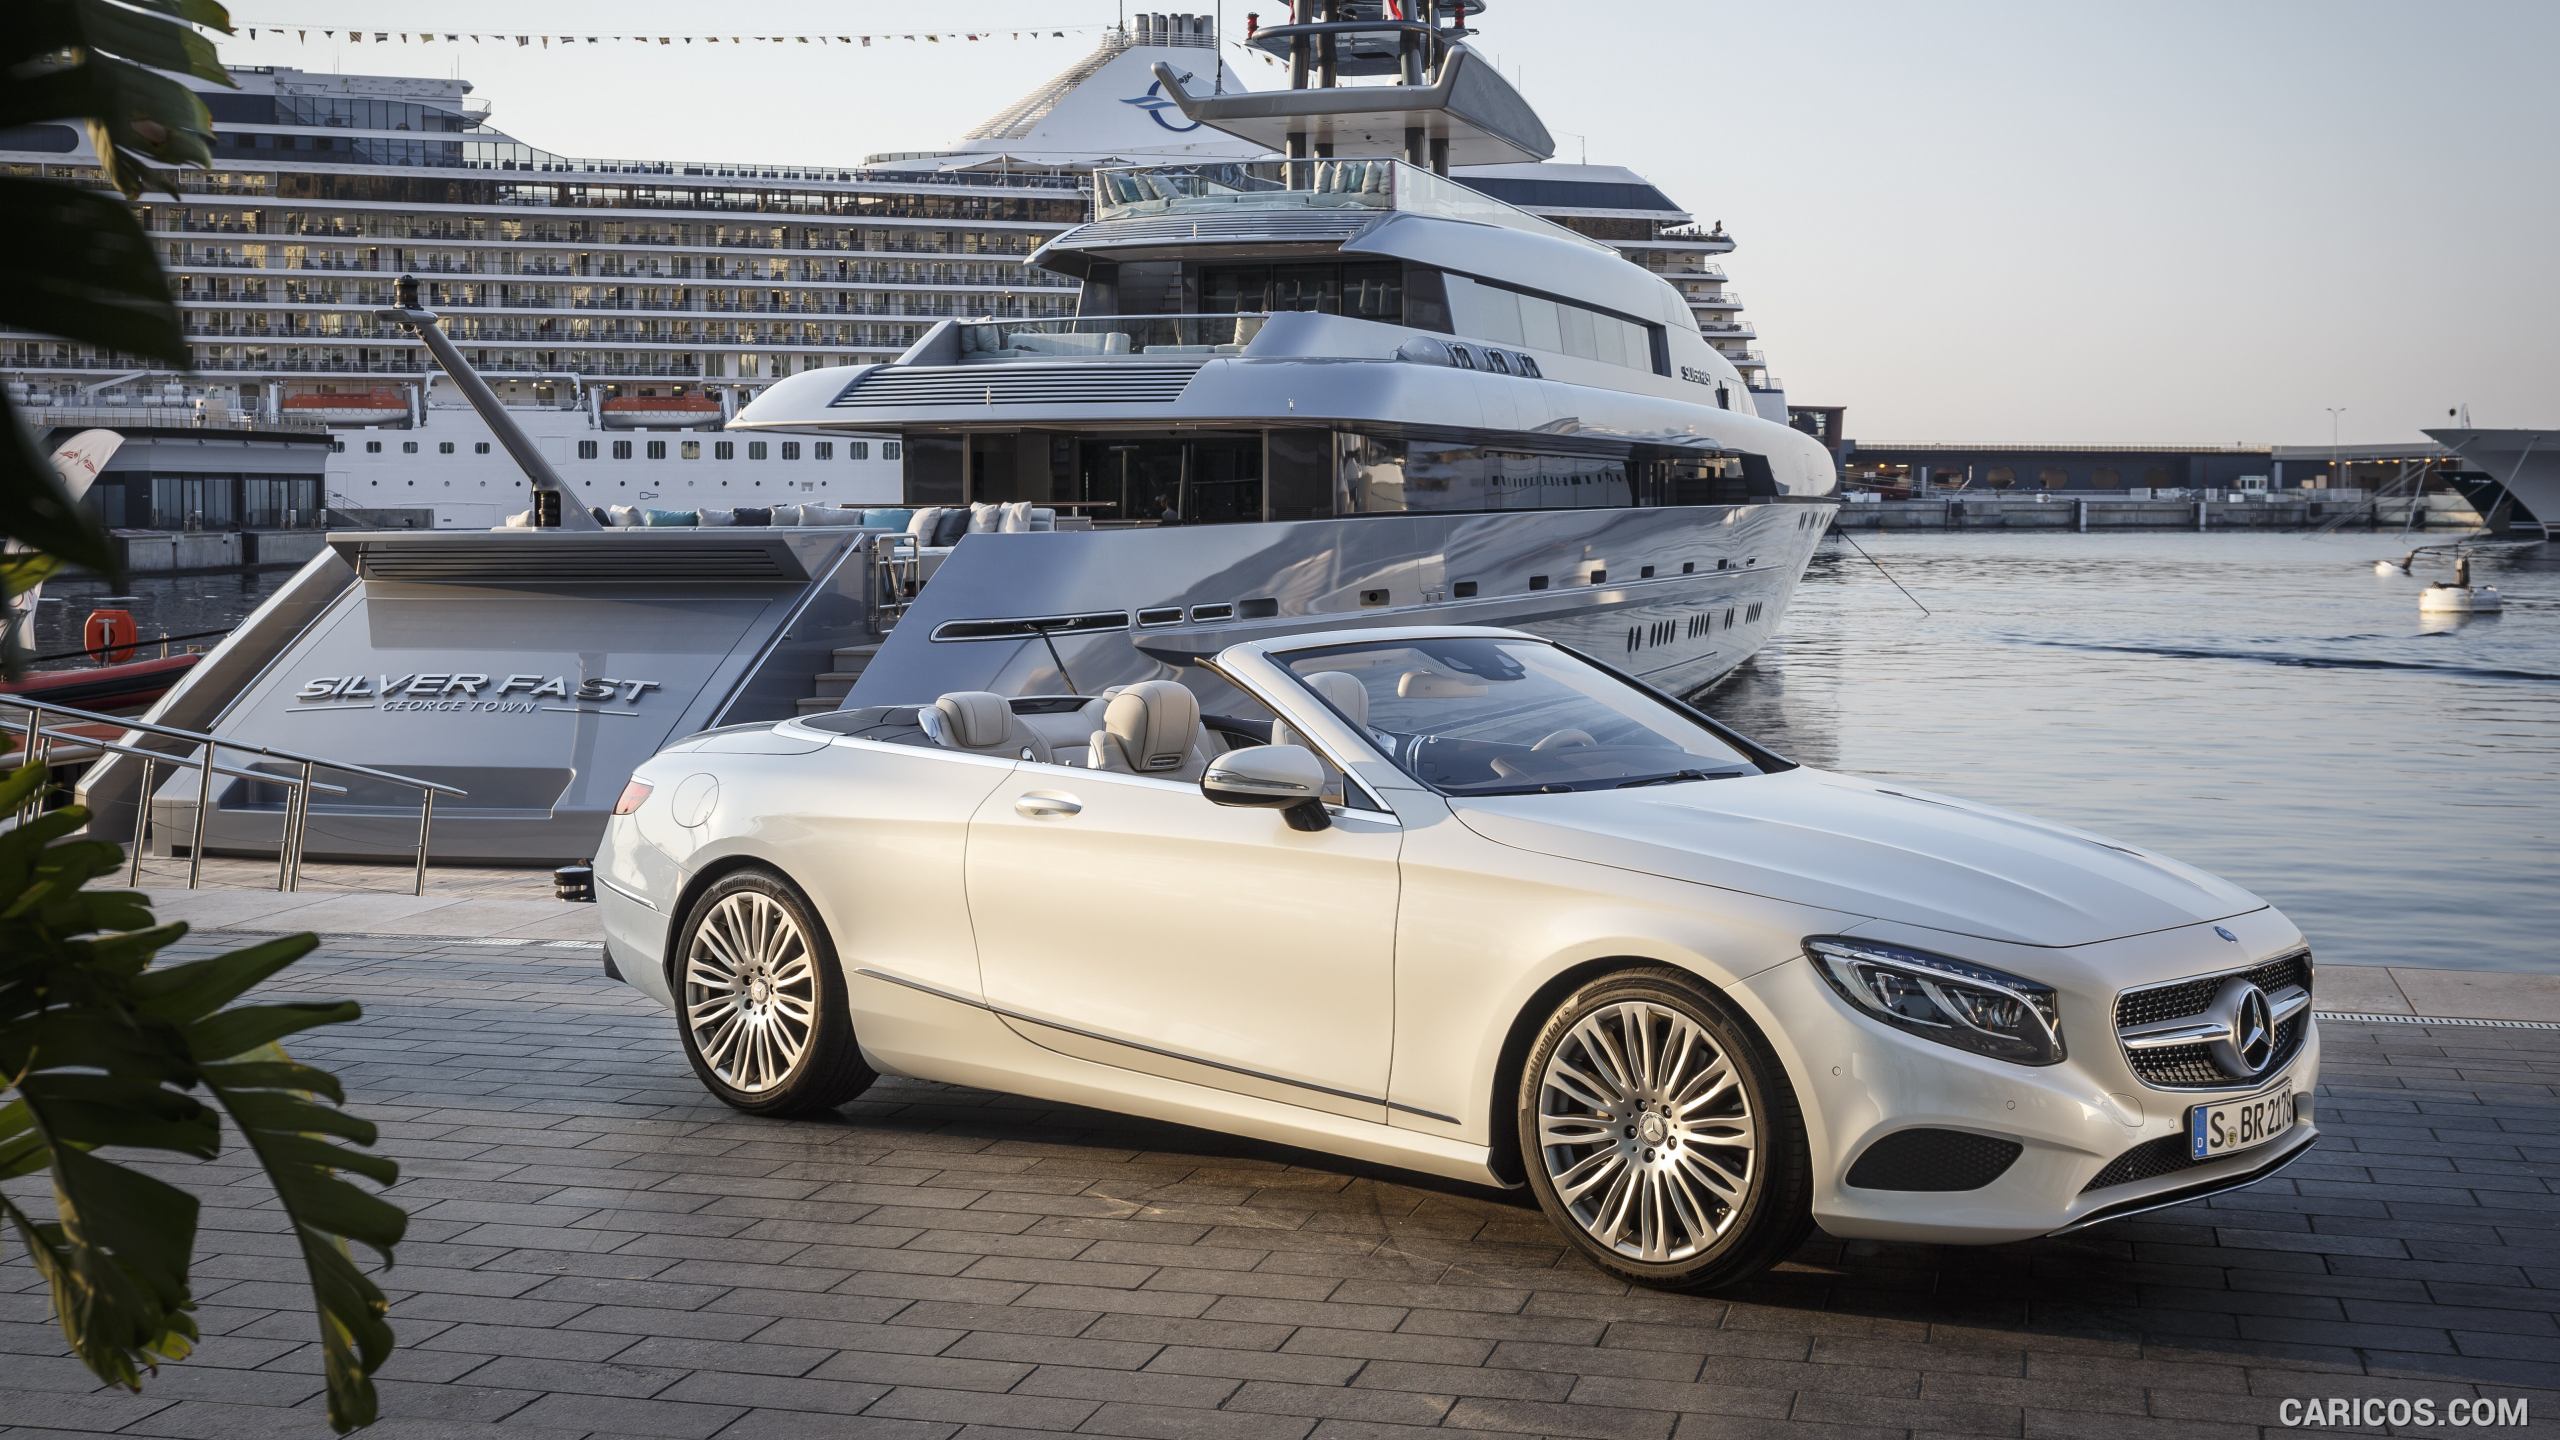 2017 Mercedes-Benz S-Class S500 Cabriolet and Silver Fast Yacht - Front, #55 of 56